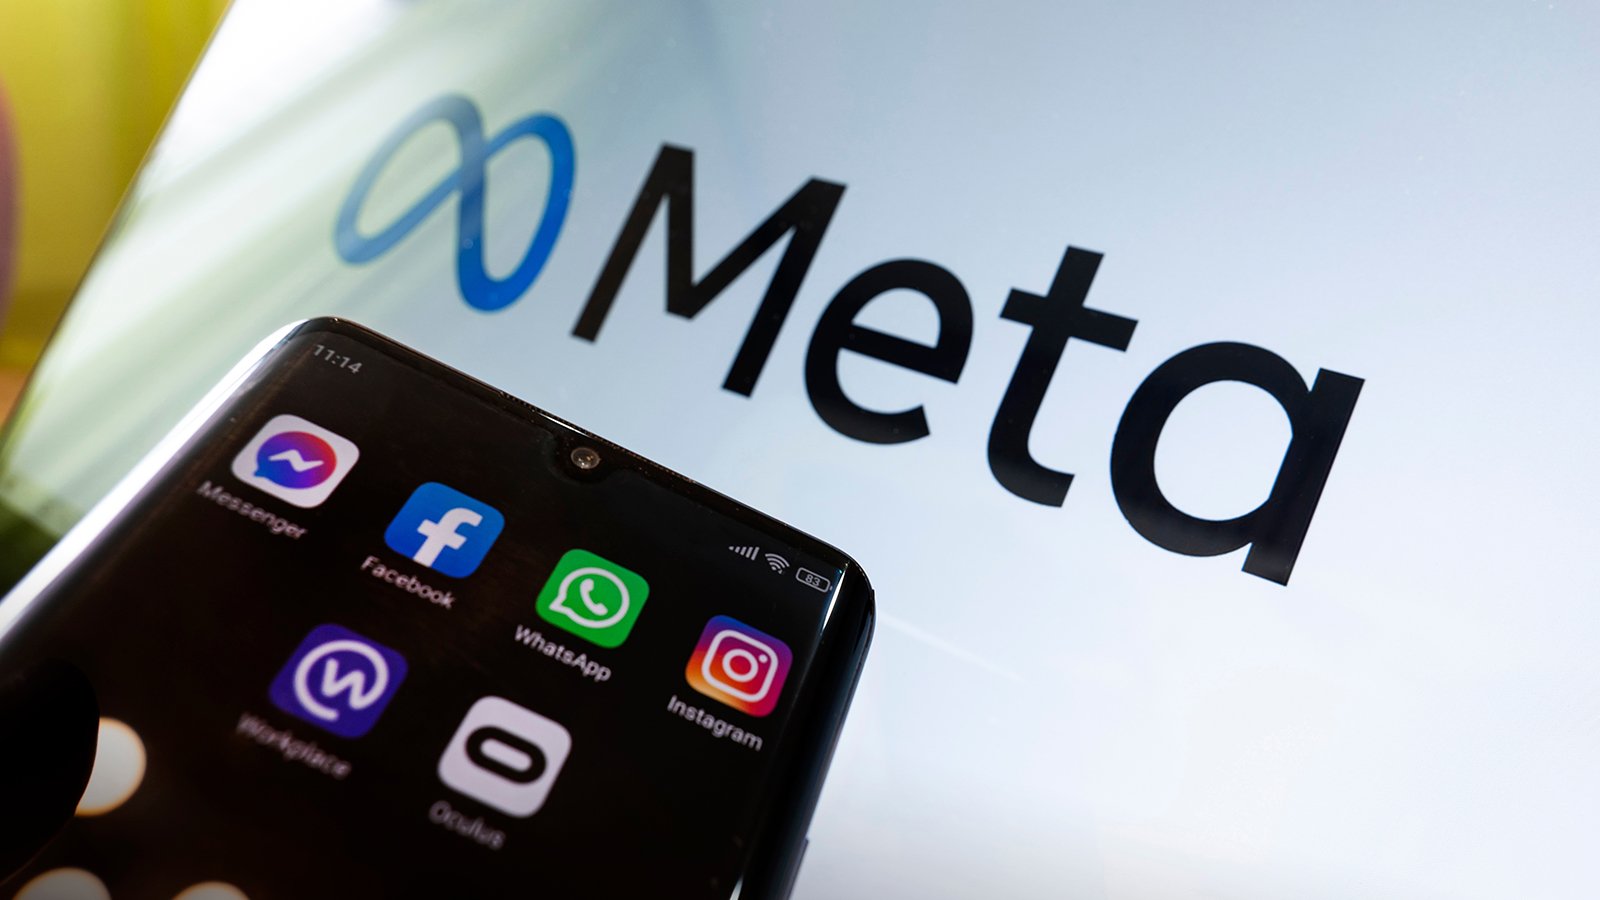 A smartphone, with the icons of the companies belonging to Facebook Metaverse, on the screen, held in front of a backdrop of the Metaverse logo.